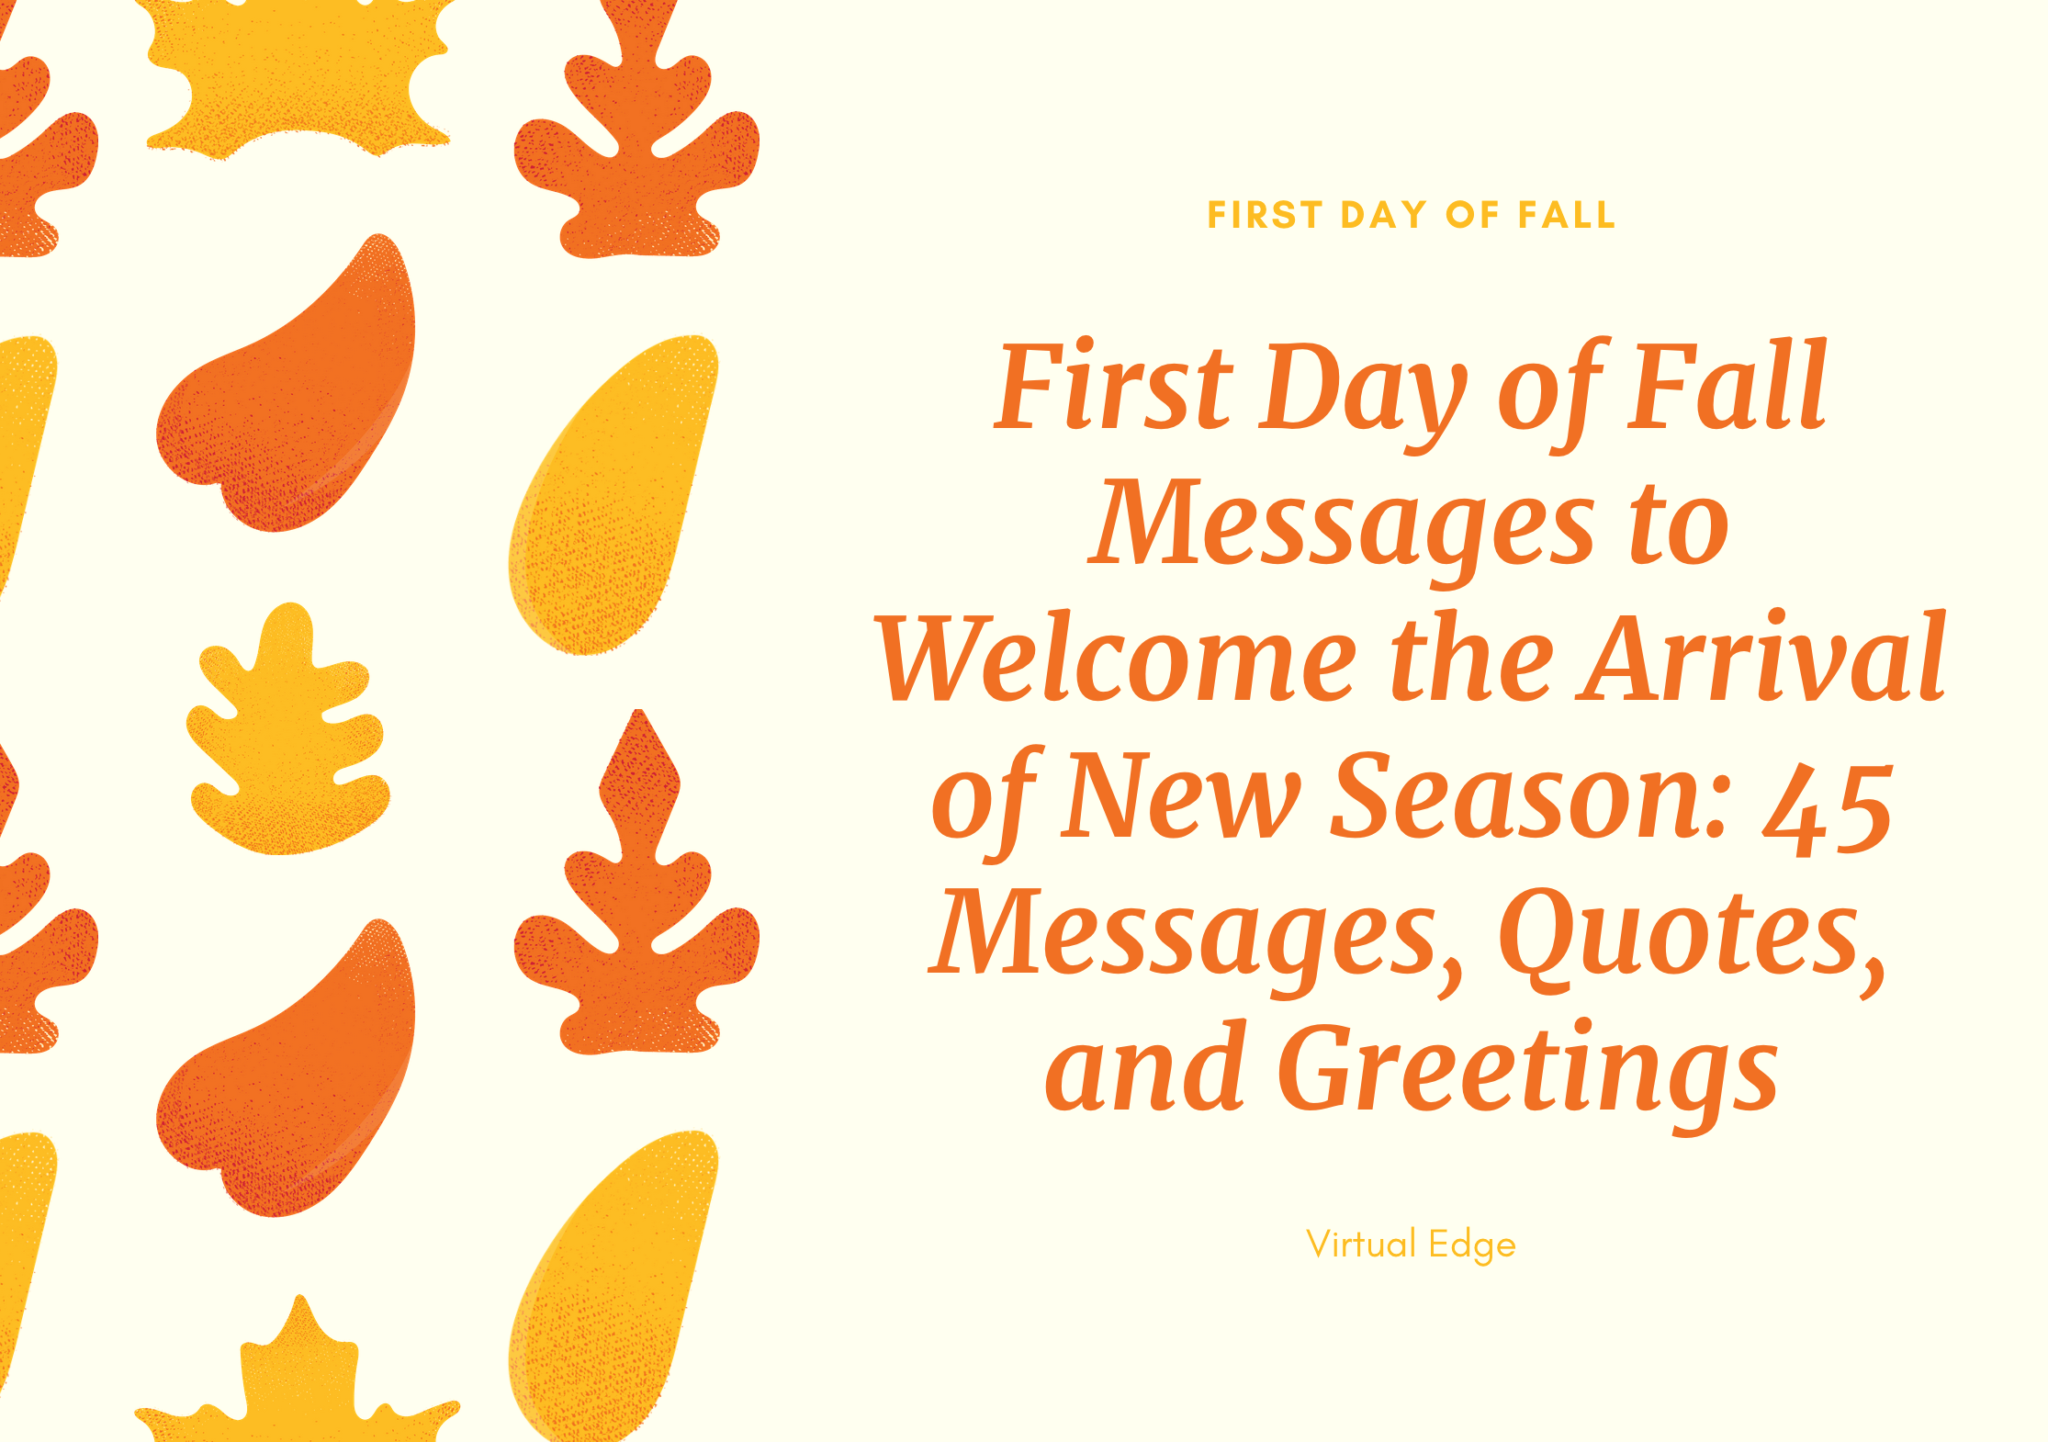 first-day-of-fall-messages-to-welcome-the-arrival-of-new-season-45-messages-quotes-and-greetings